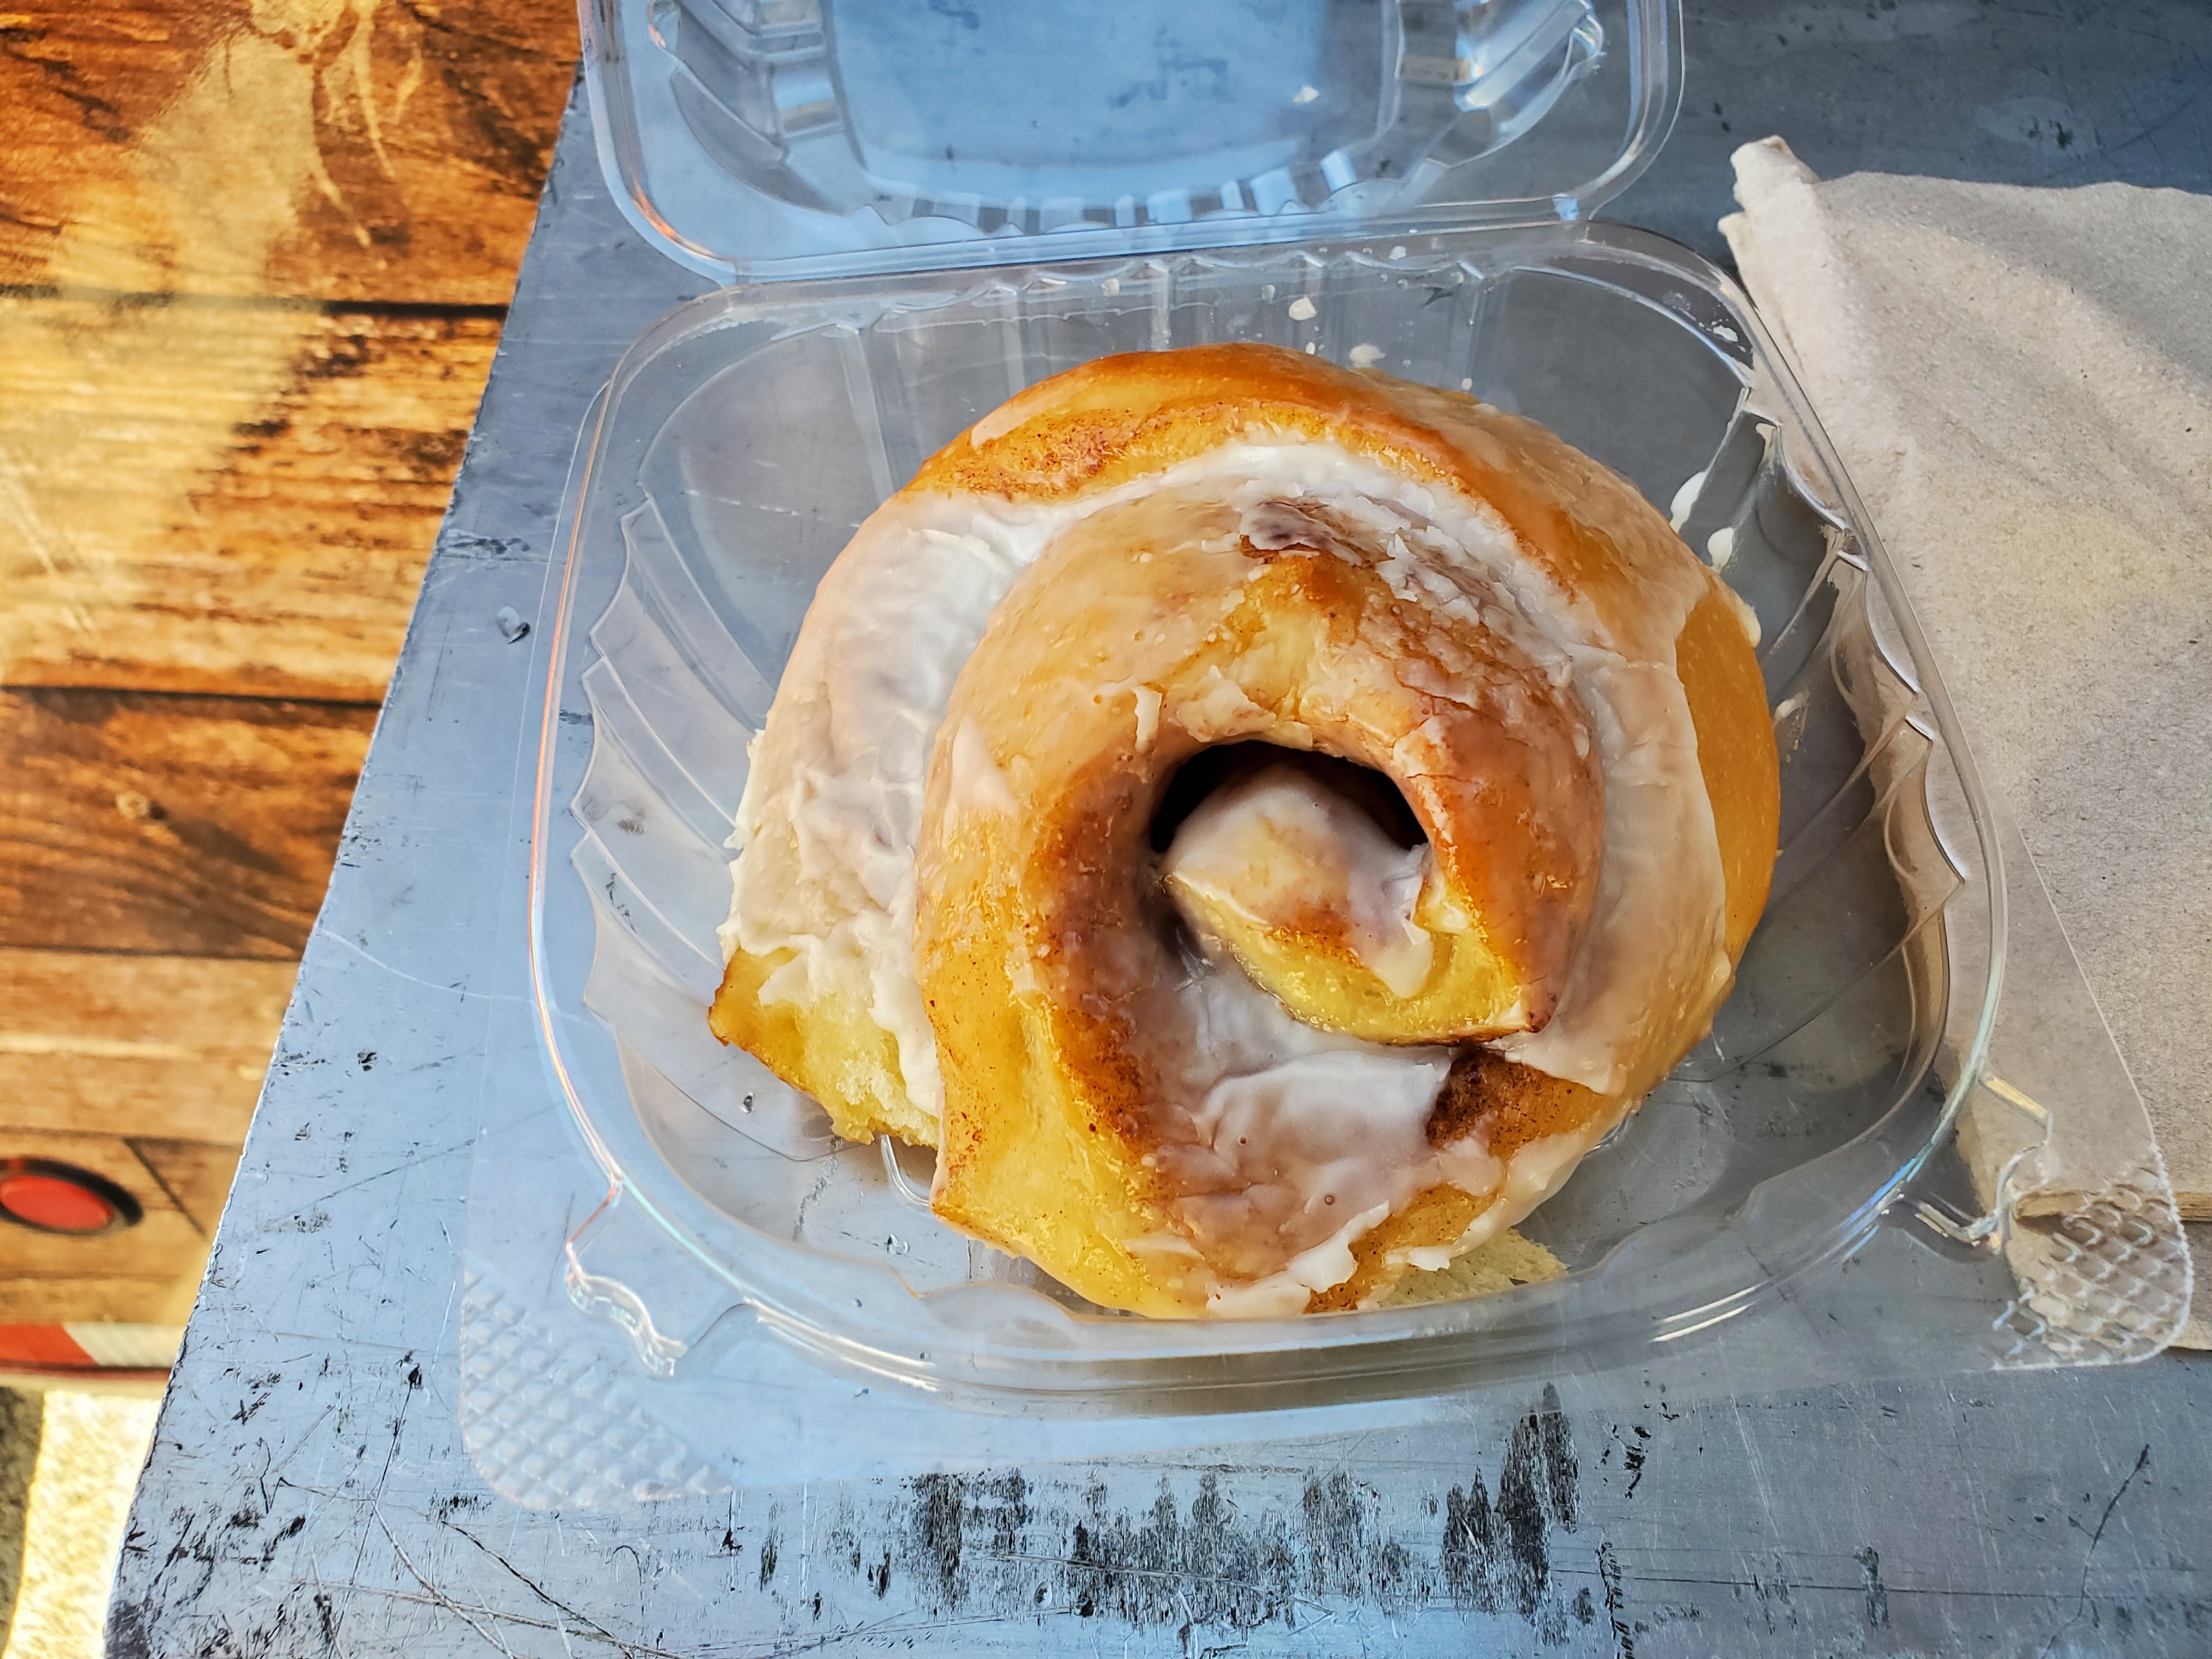 In a clear plastic container, there is a large cinnamon roll with a crackly glaze. Top image by Carl Busch.